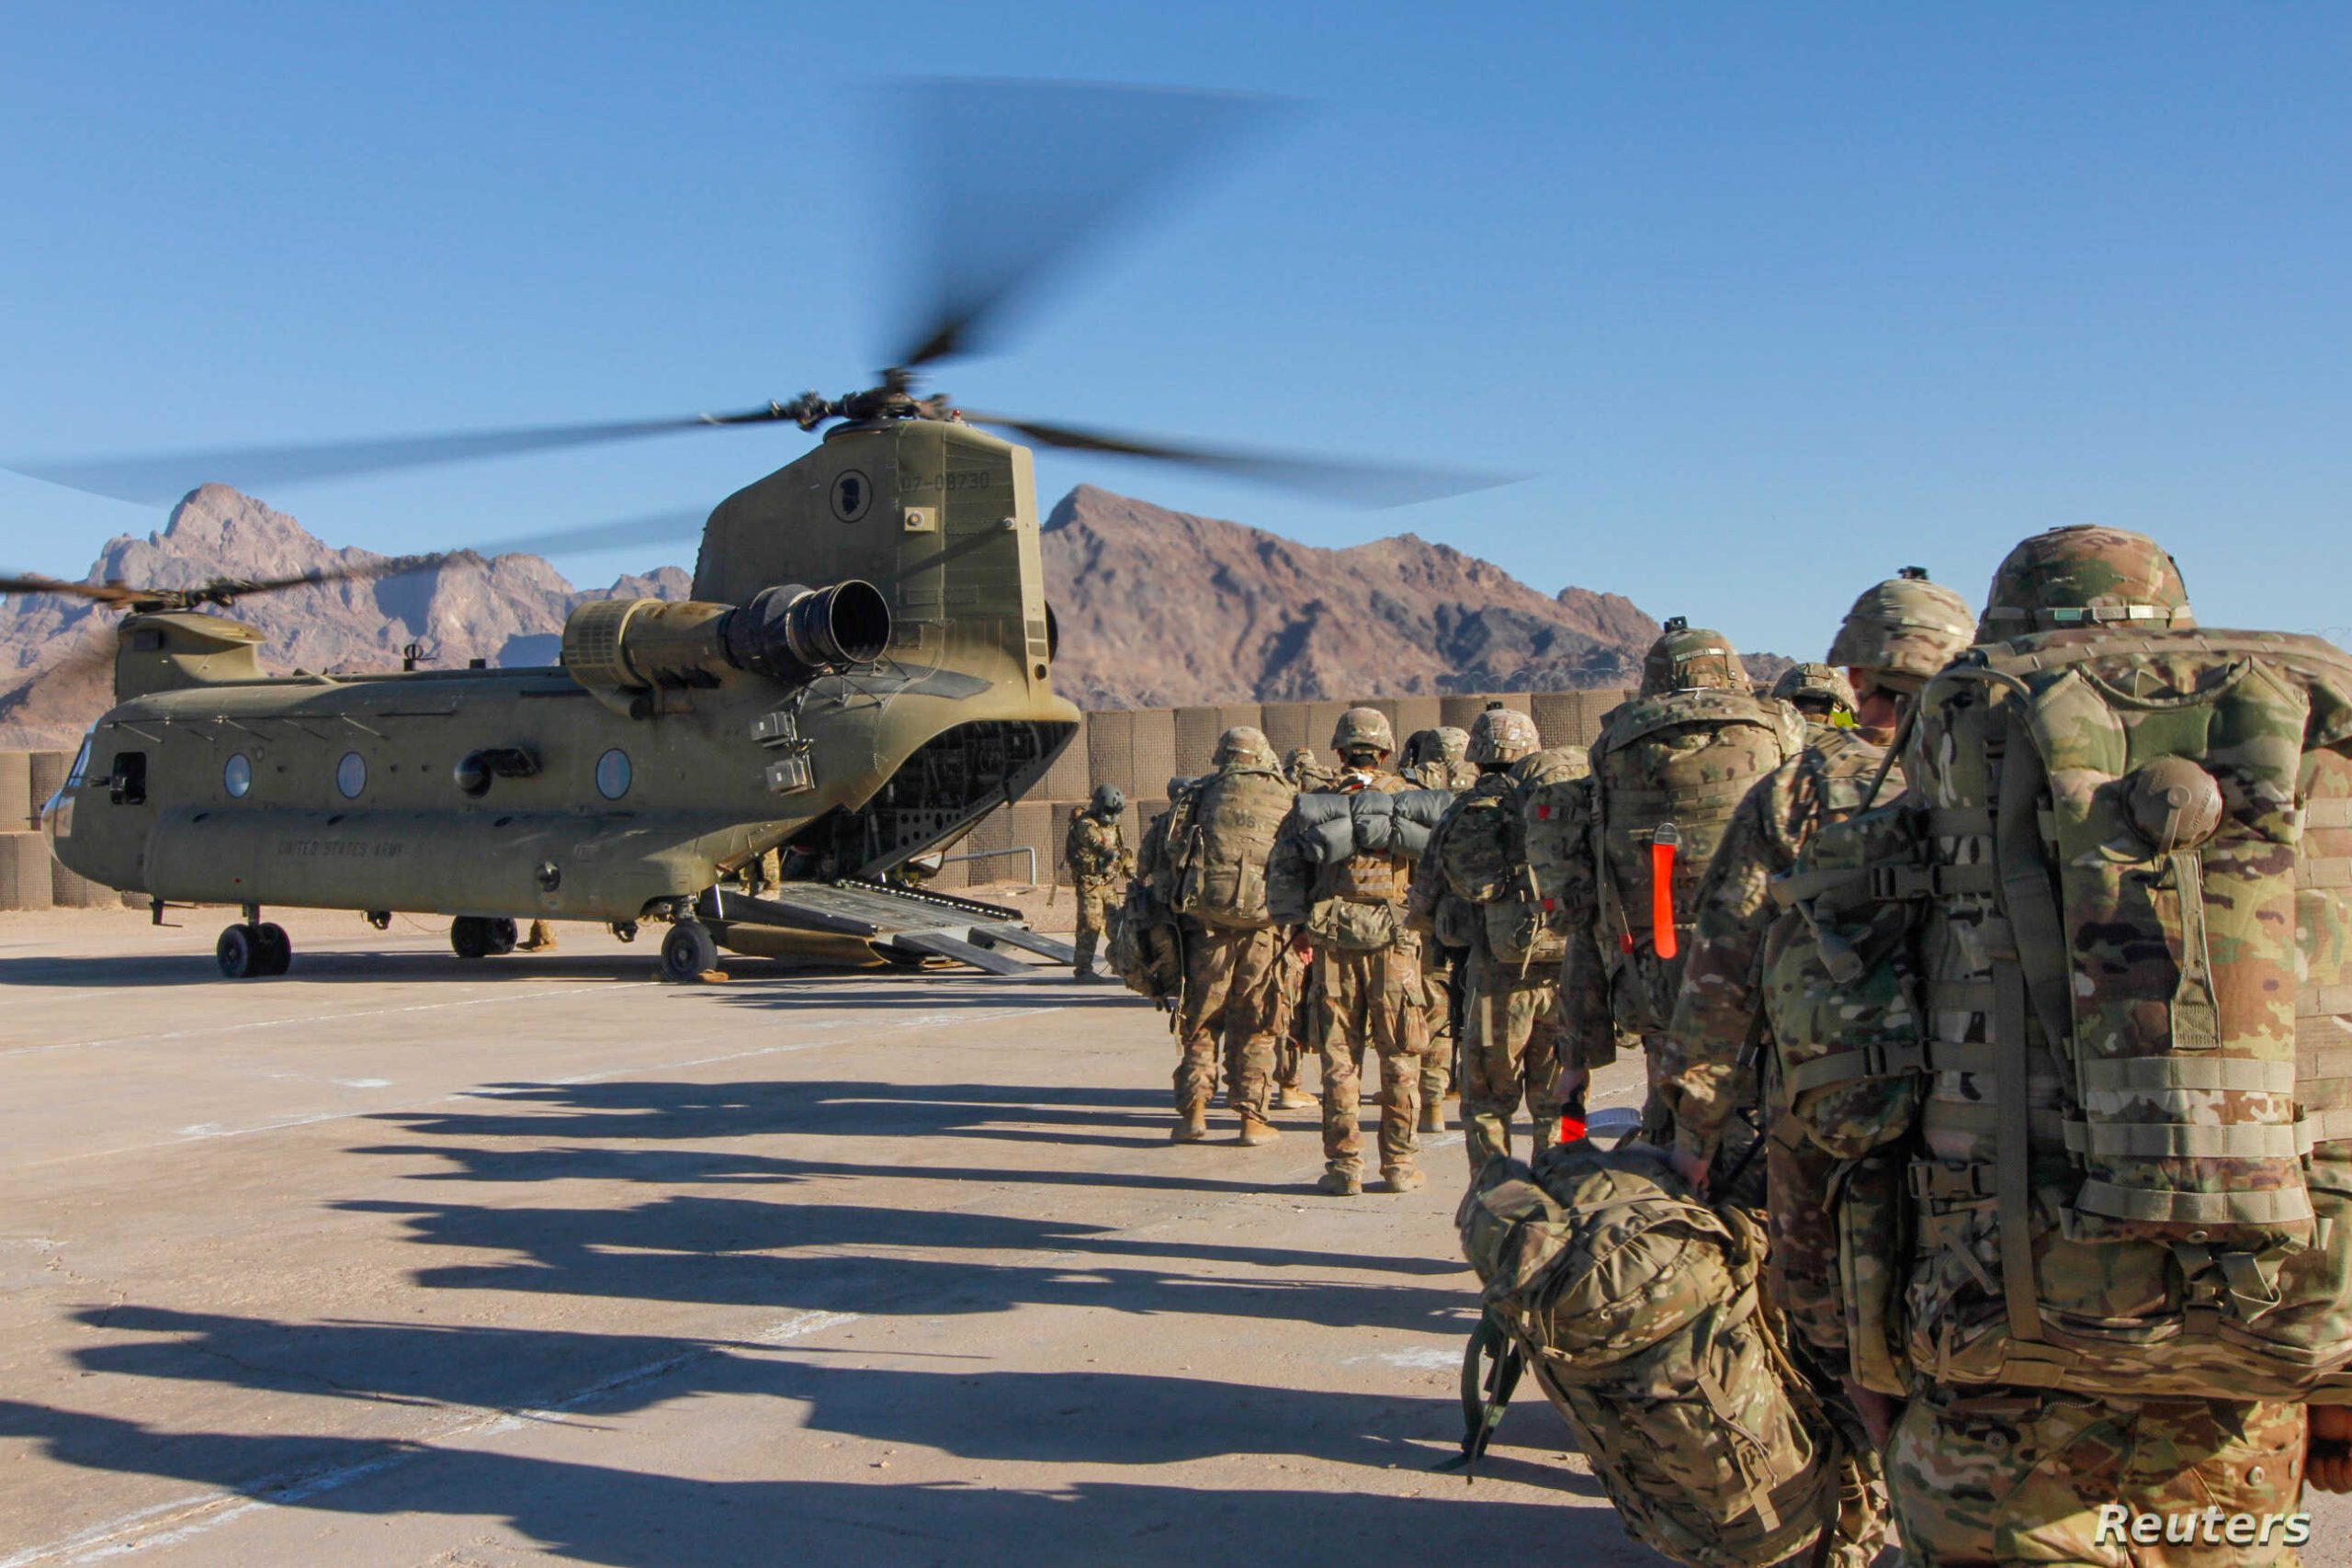 The impact of the U.S. withdrawal from Afghanistan on regional dynamics and the future of the Middle East